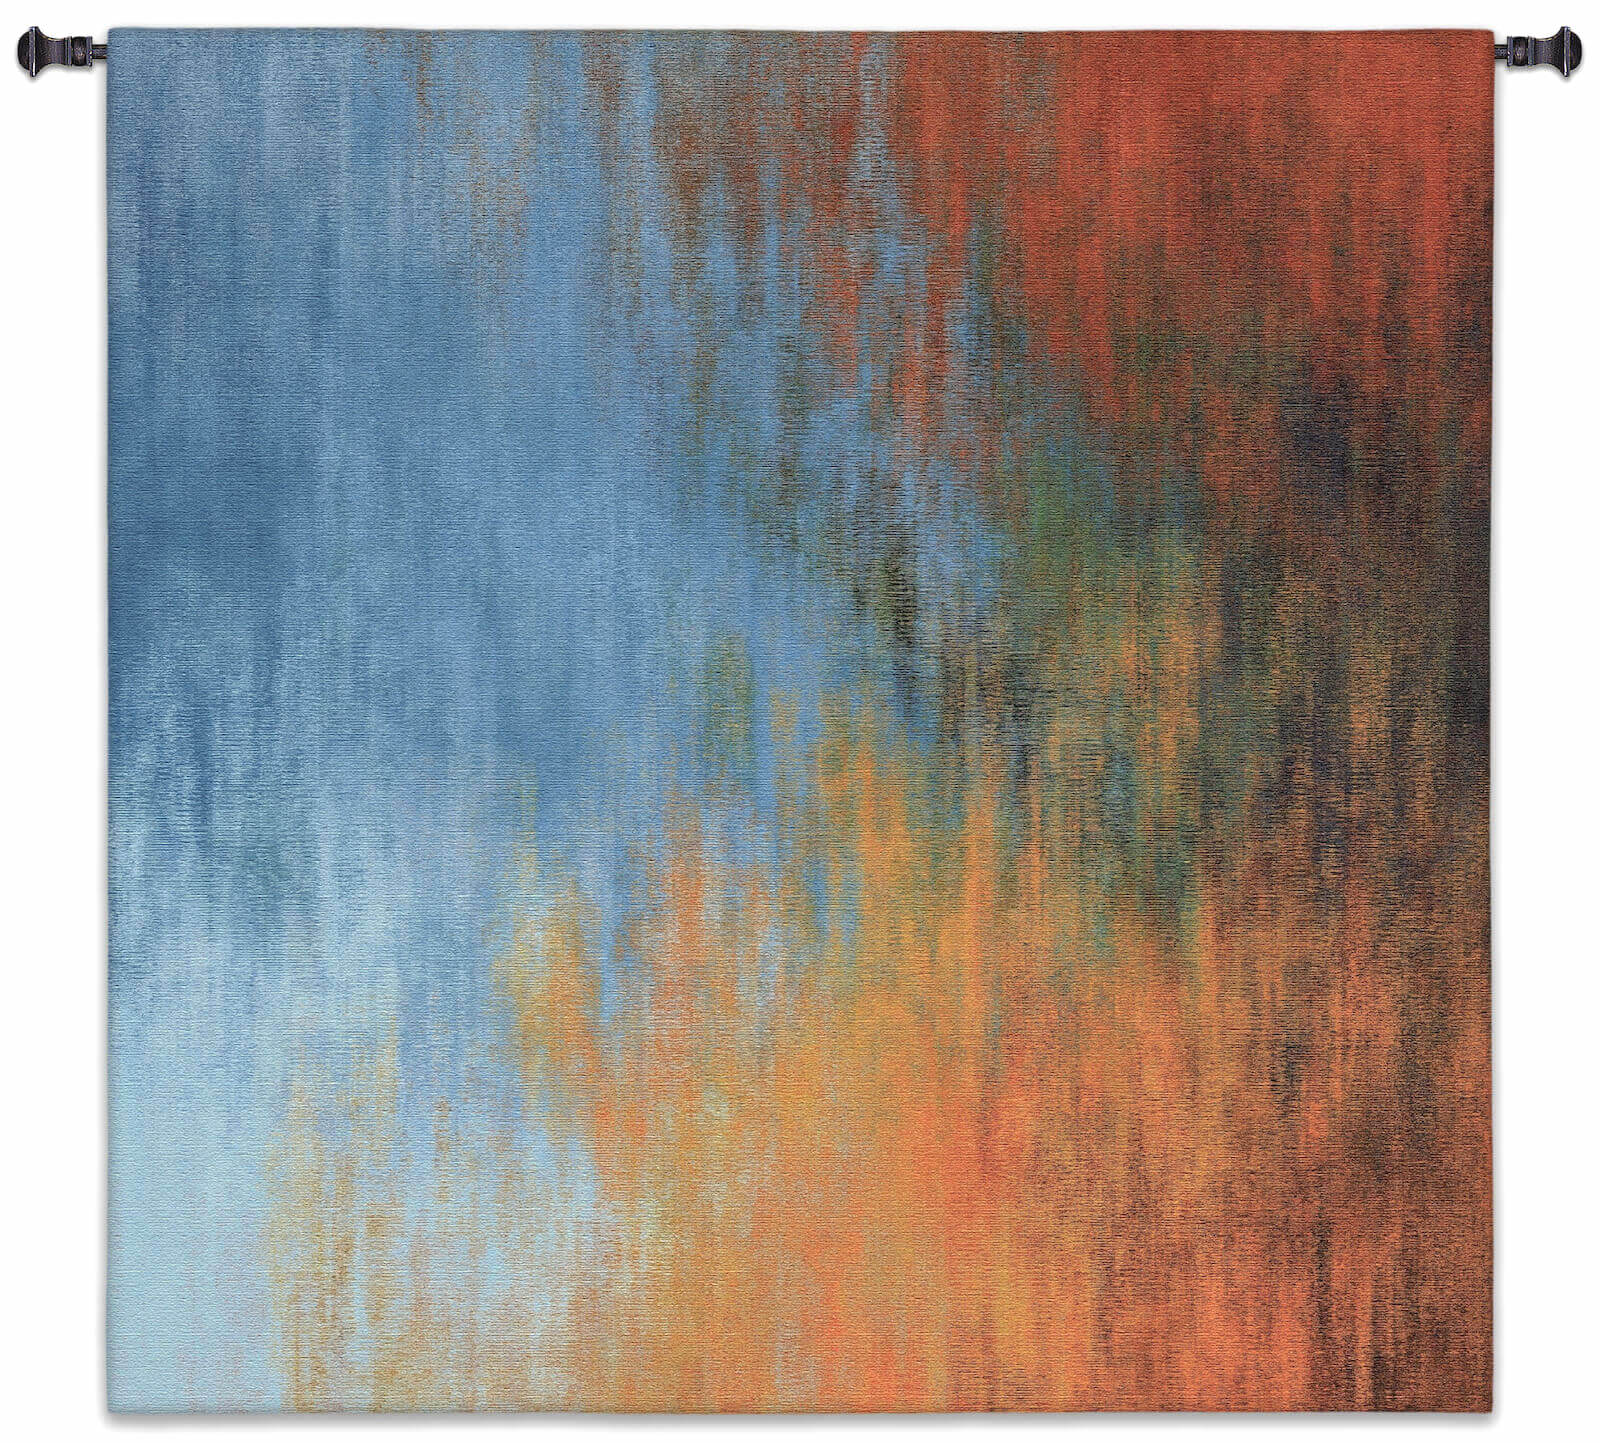 Continuum Square Wall Tapestry abstract, colorful, red, blue, orange, Valiance Square Wall Tapestry, Continuum